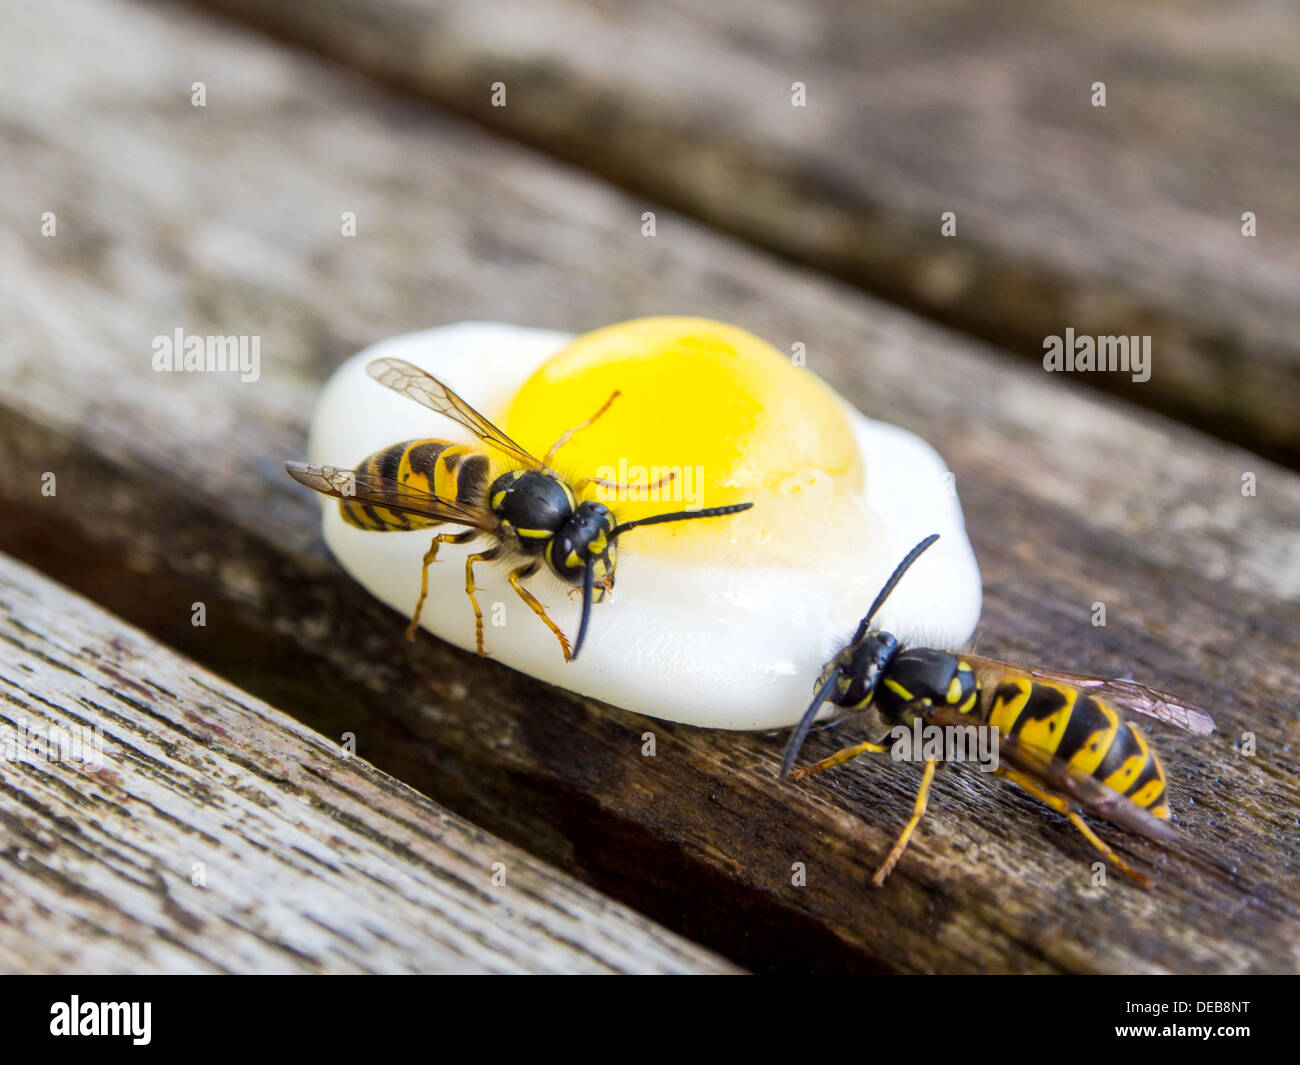 Two wasps feeding on an egg shaped sweet on top of a picnic table Stock Photo